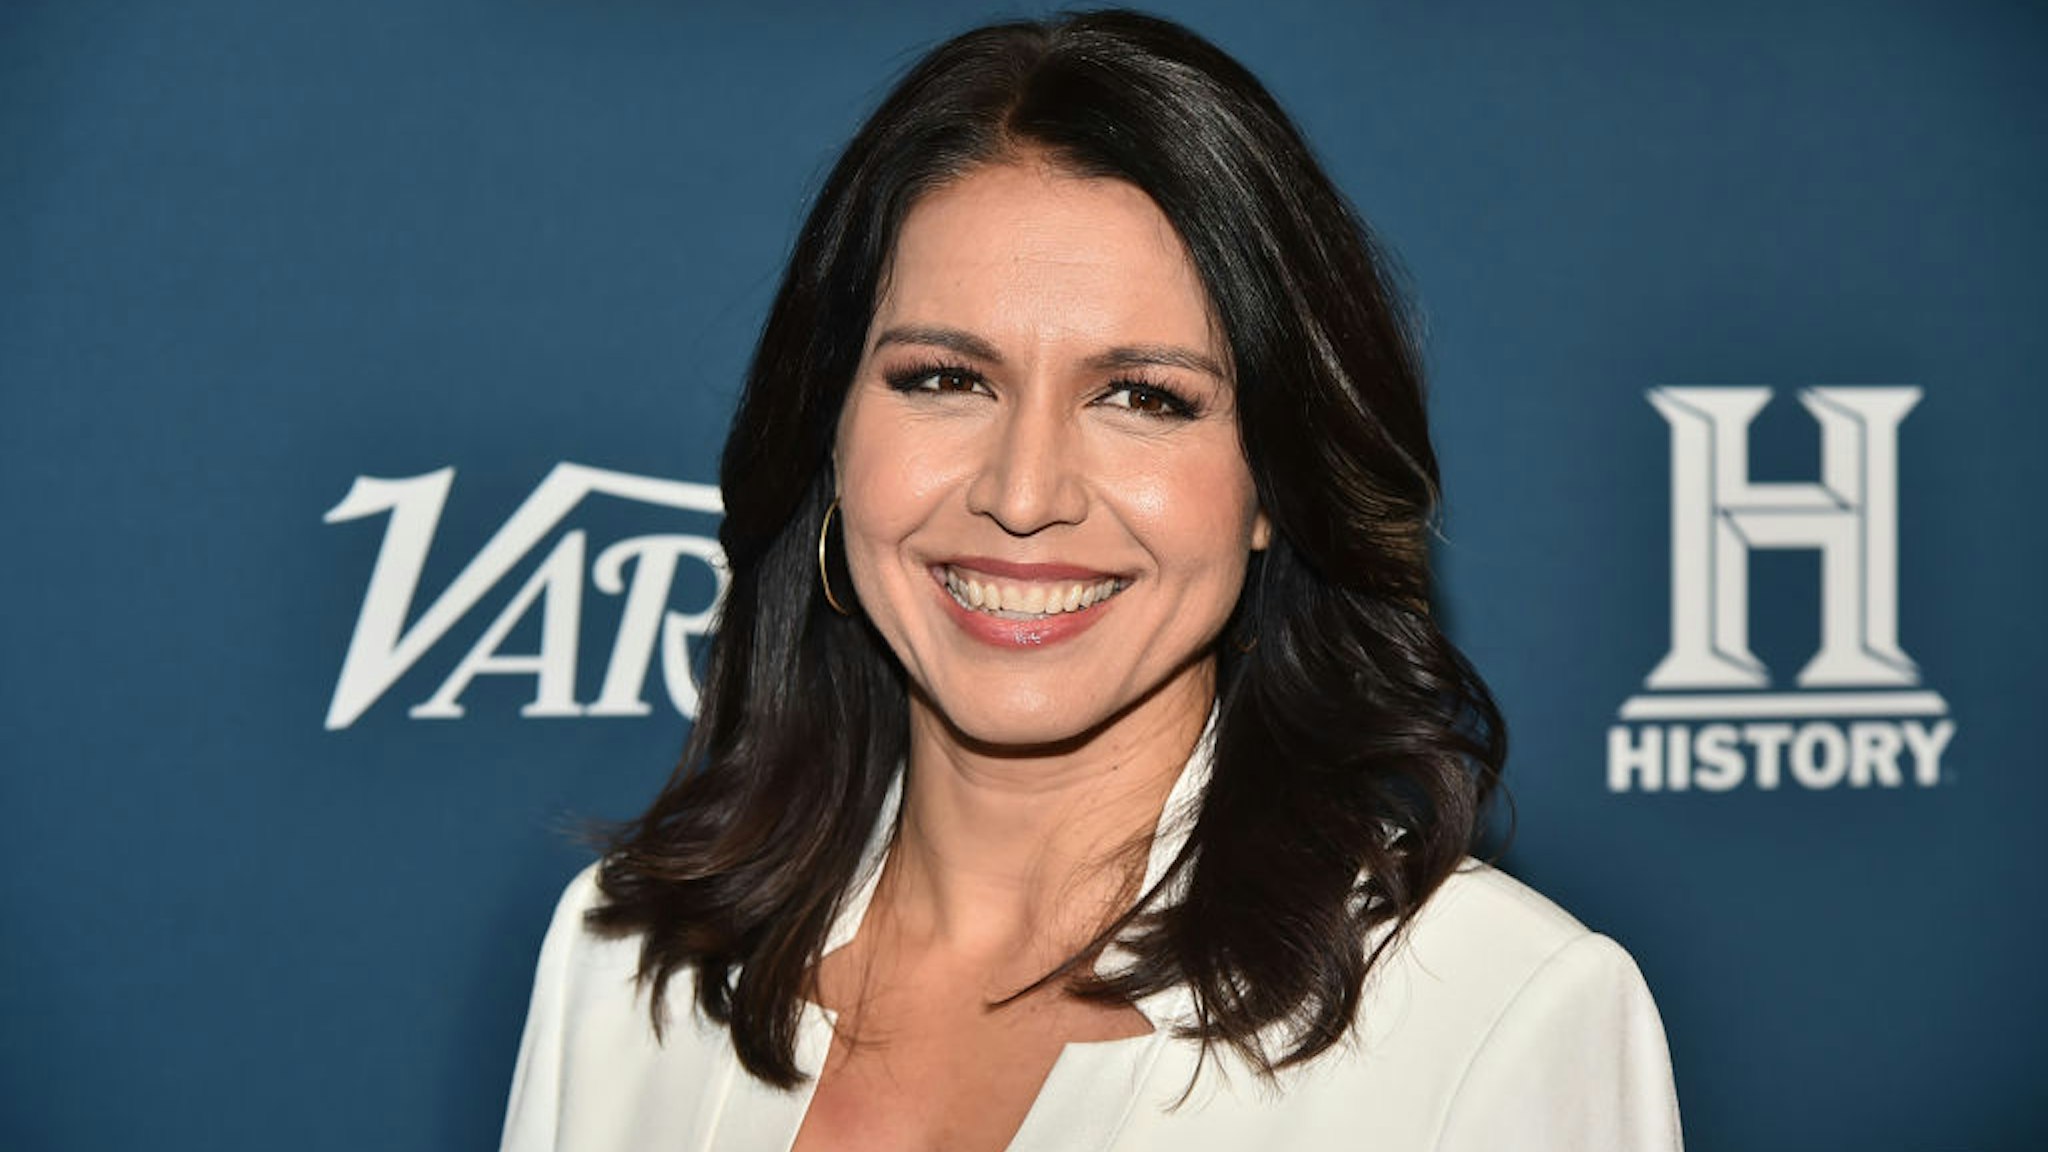 NEW YORK, NEW YORK - NOVEMBER 06: Tulsi Gabbard attends Variety's 3rd Annual Salute To Service at Cipriani 25 Broadway on November 06, 2019 in New York City.